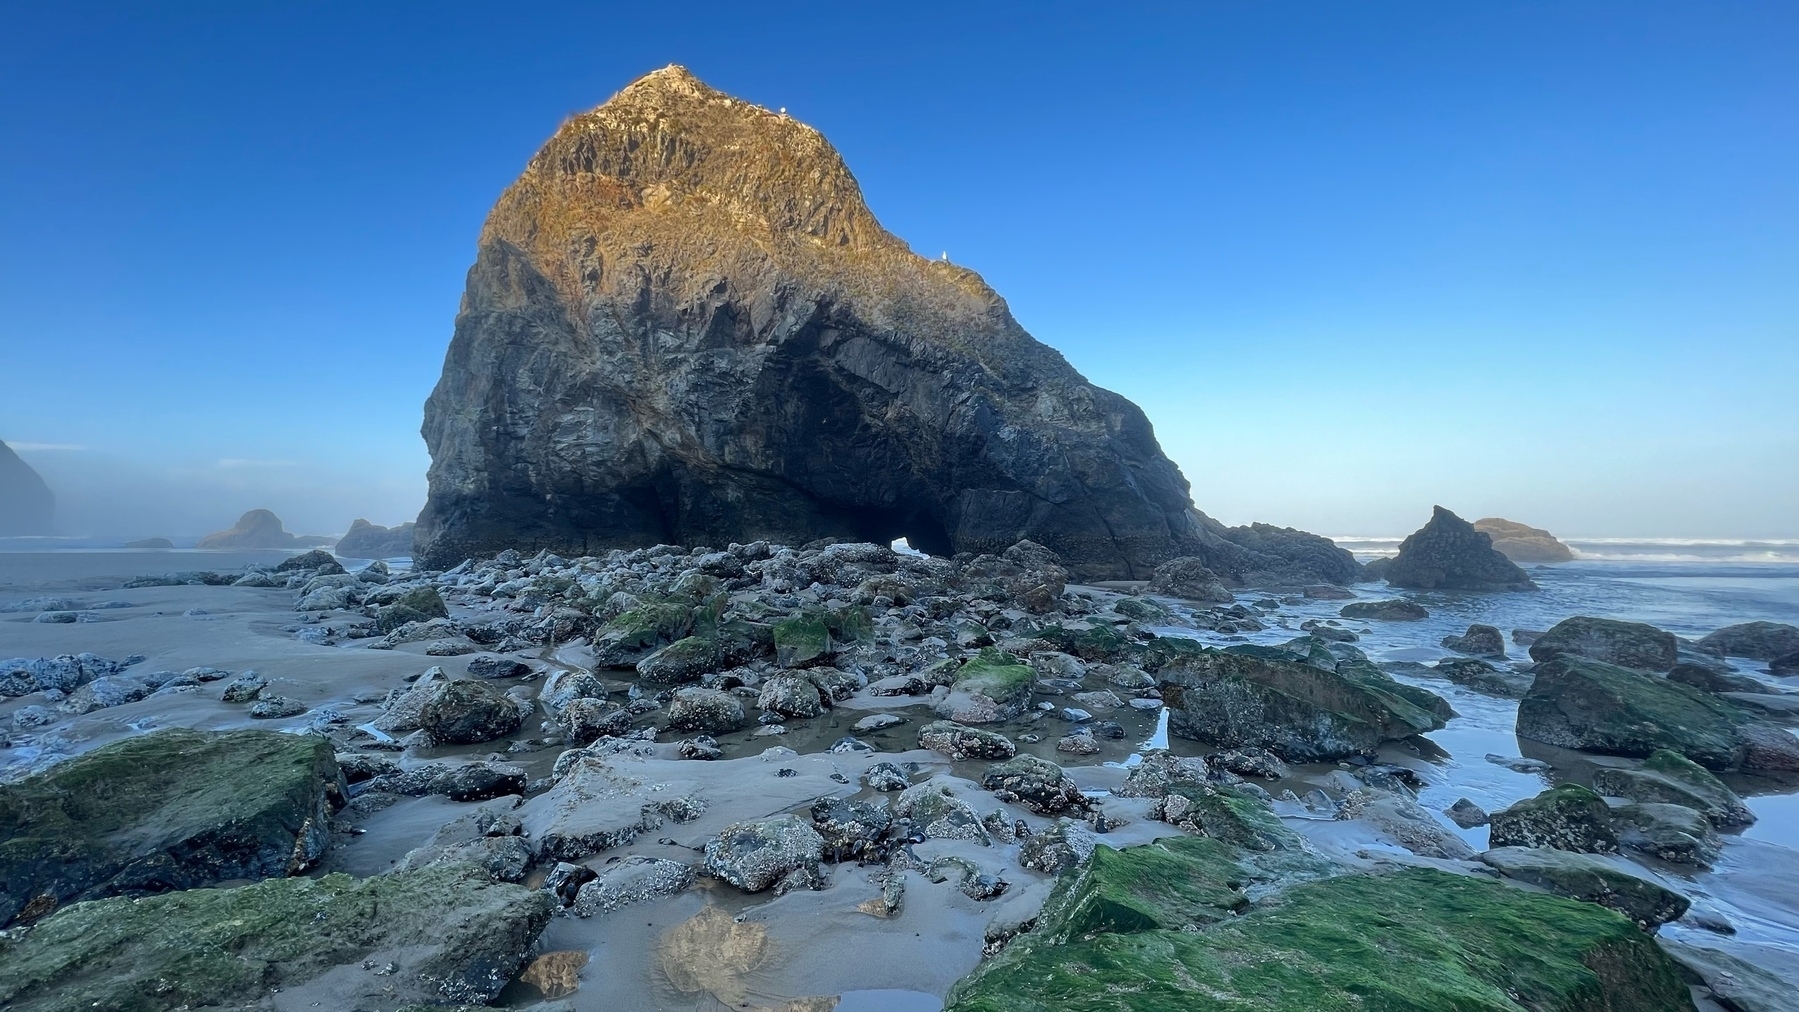 Large sea stack (rock) at morning low tide, exposing a hole through it at the base